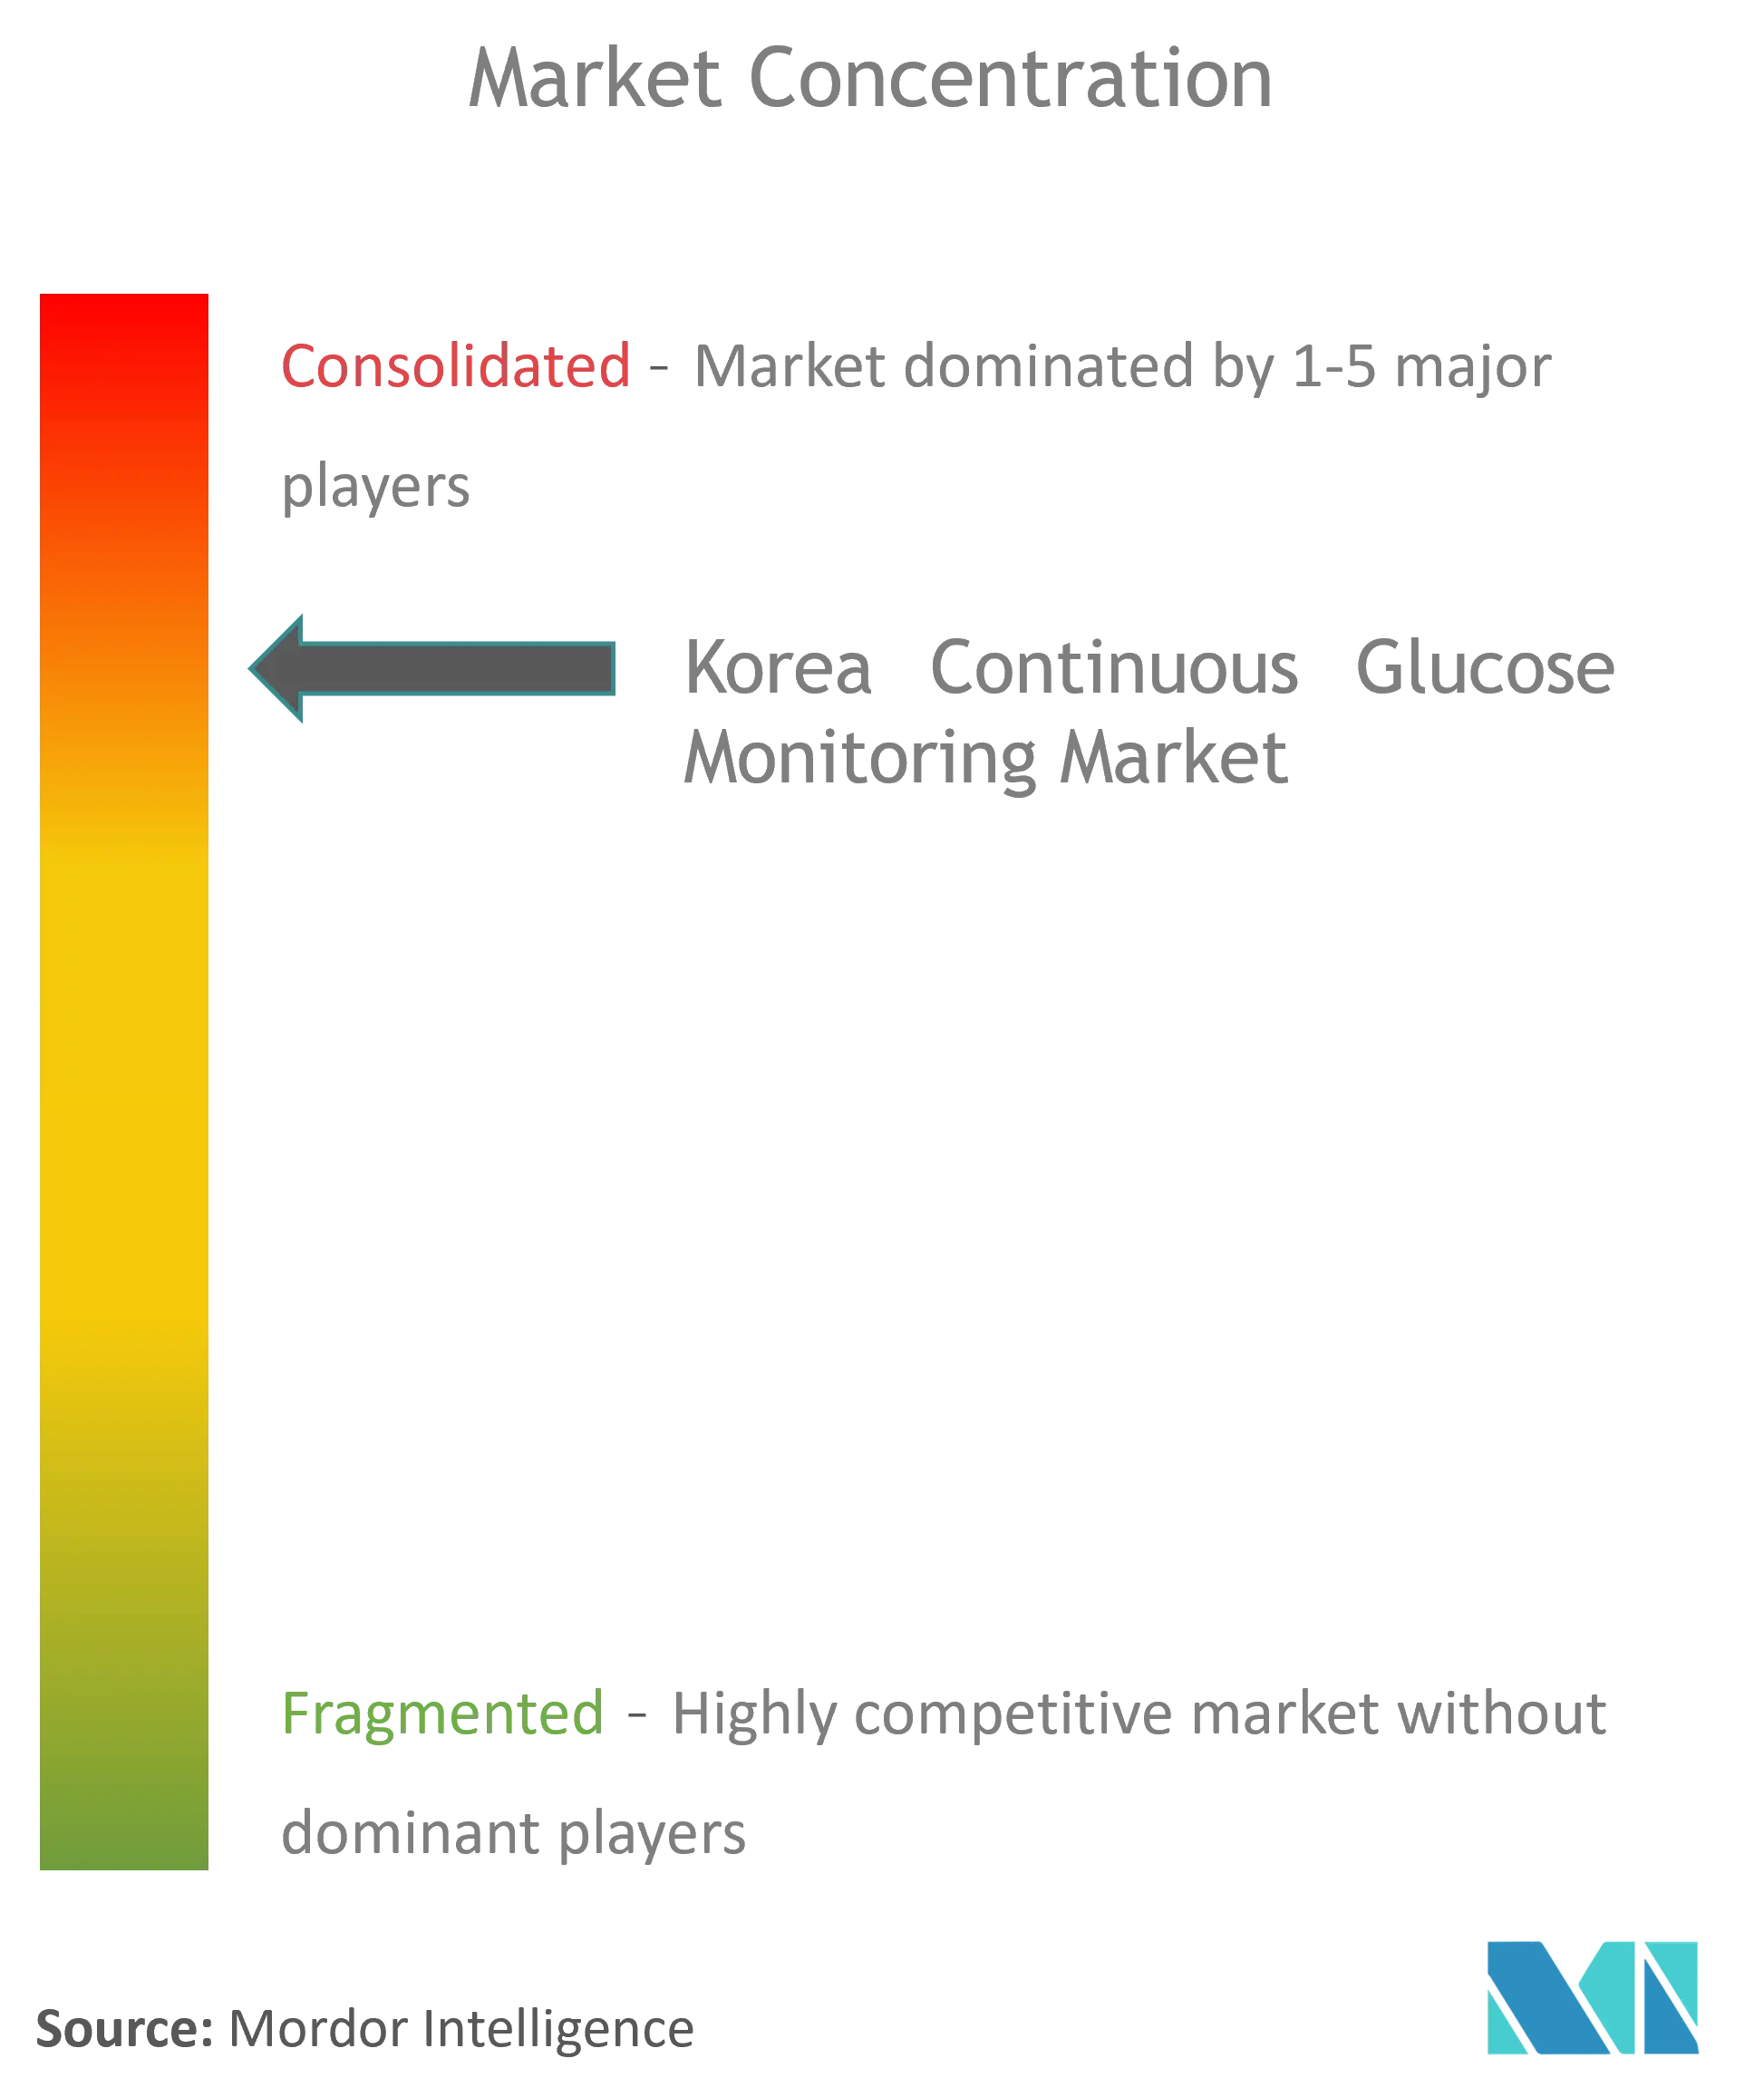 Korea Continuous Glucose Monitoring Devices Market Concentration